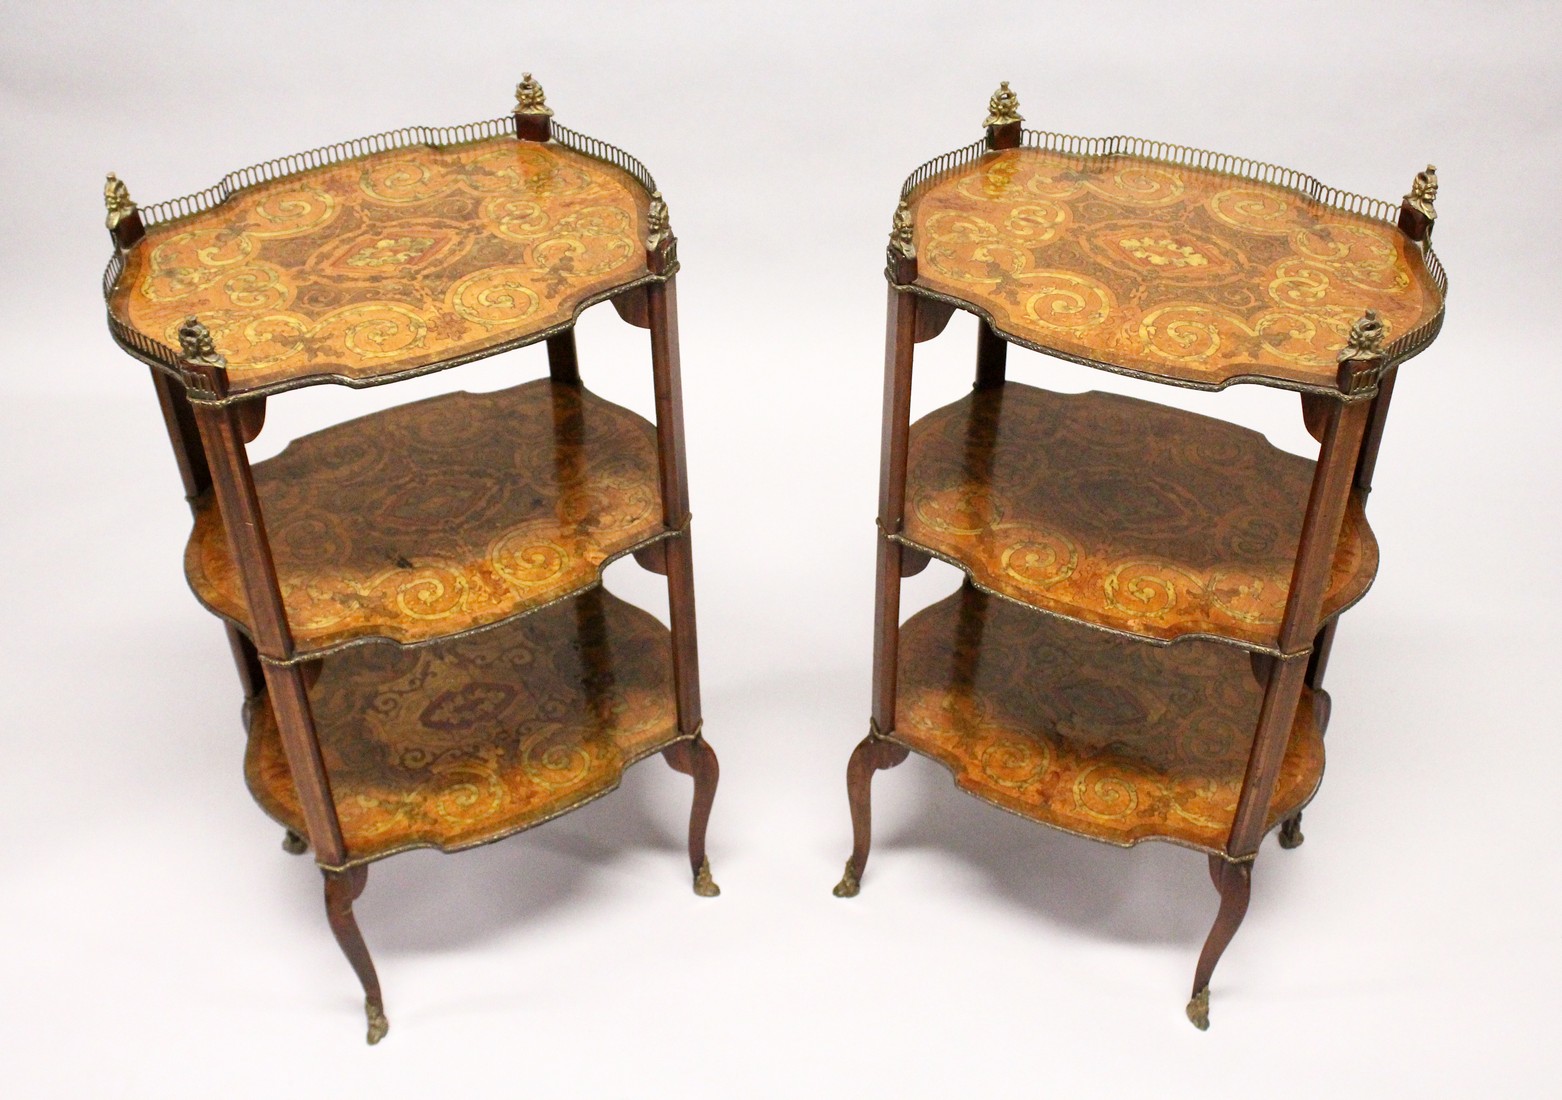 A PAIR OF EARLY 20TH CENTURY FRENCH MARQUETRY AND ORMOLU MOUNTED THREE TIER ETAGERES, with galleried